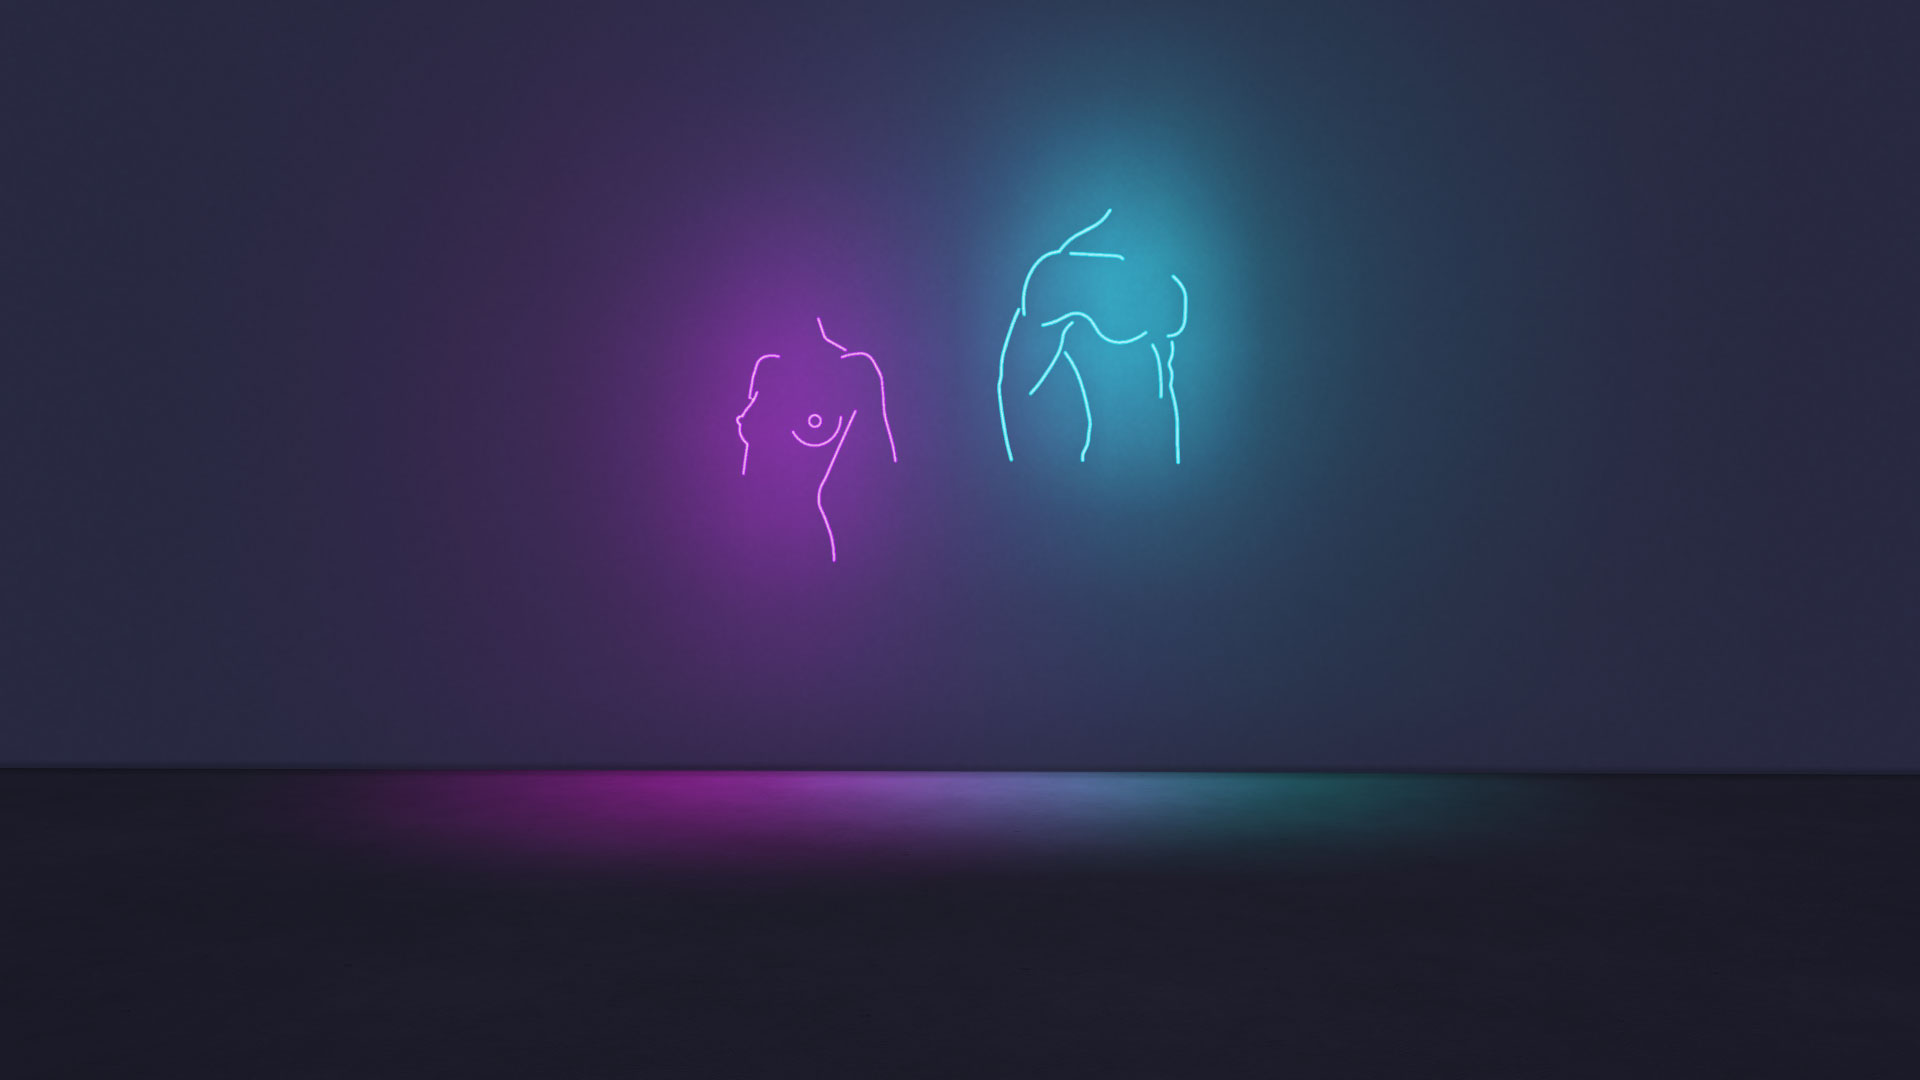 The sims 4 neon female body and male body sign